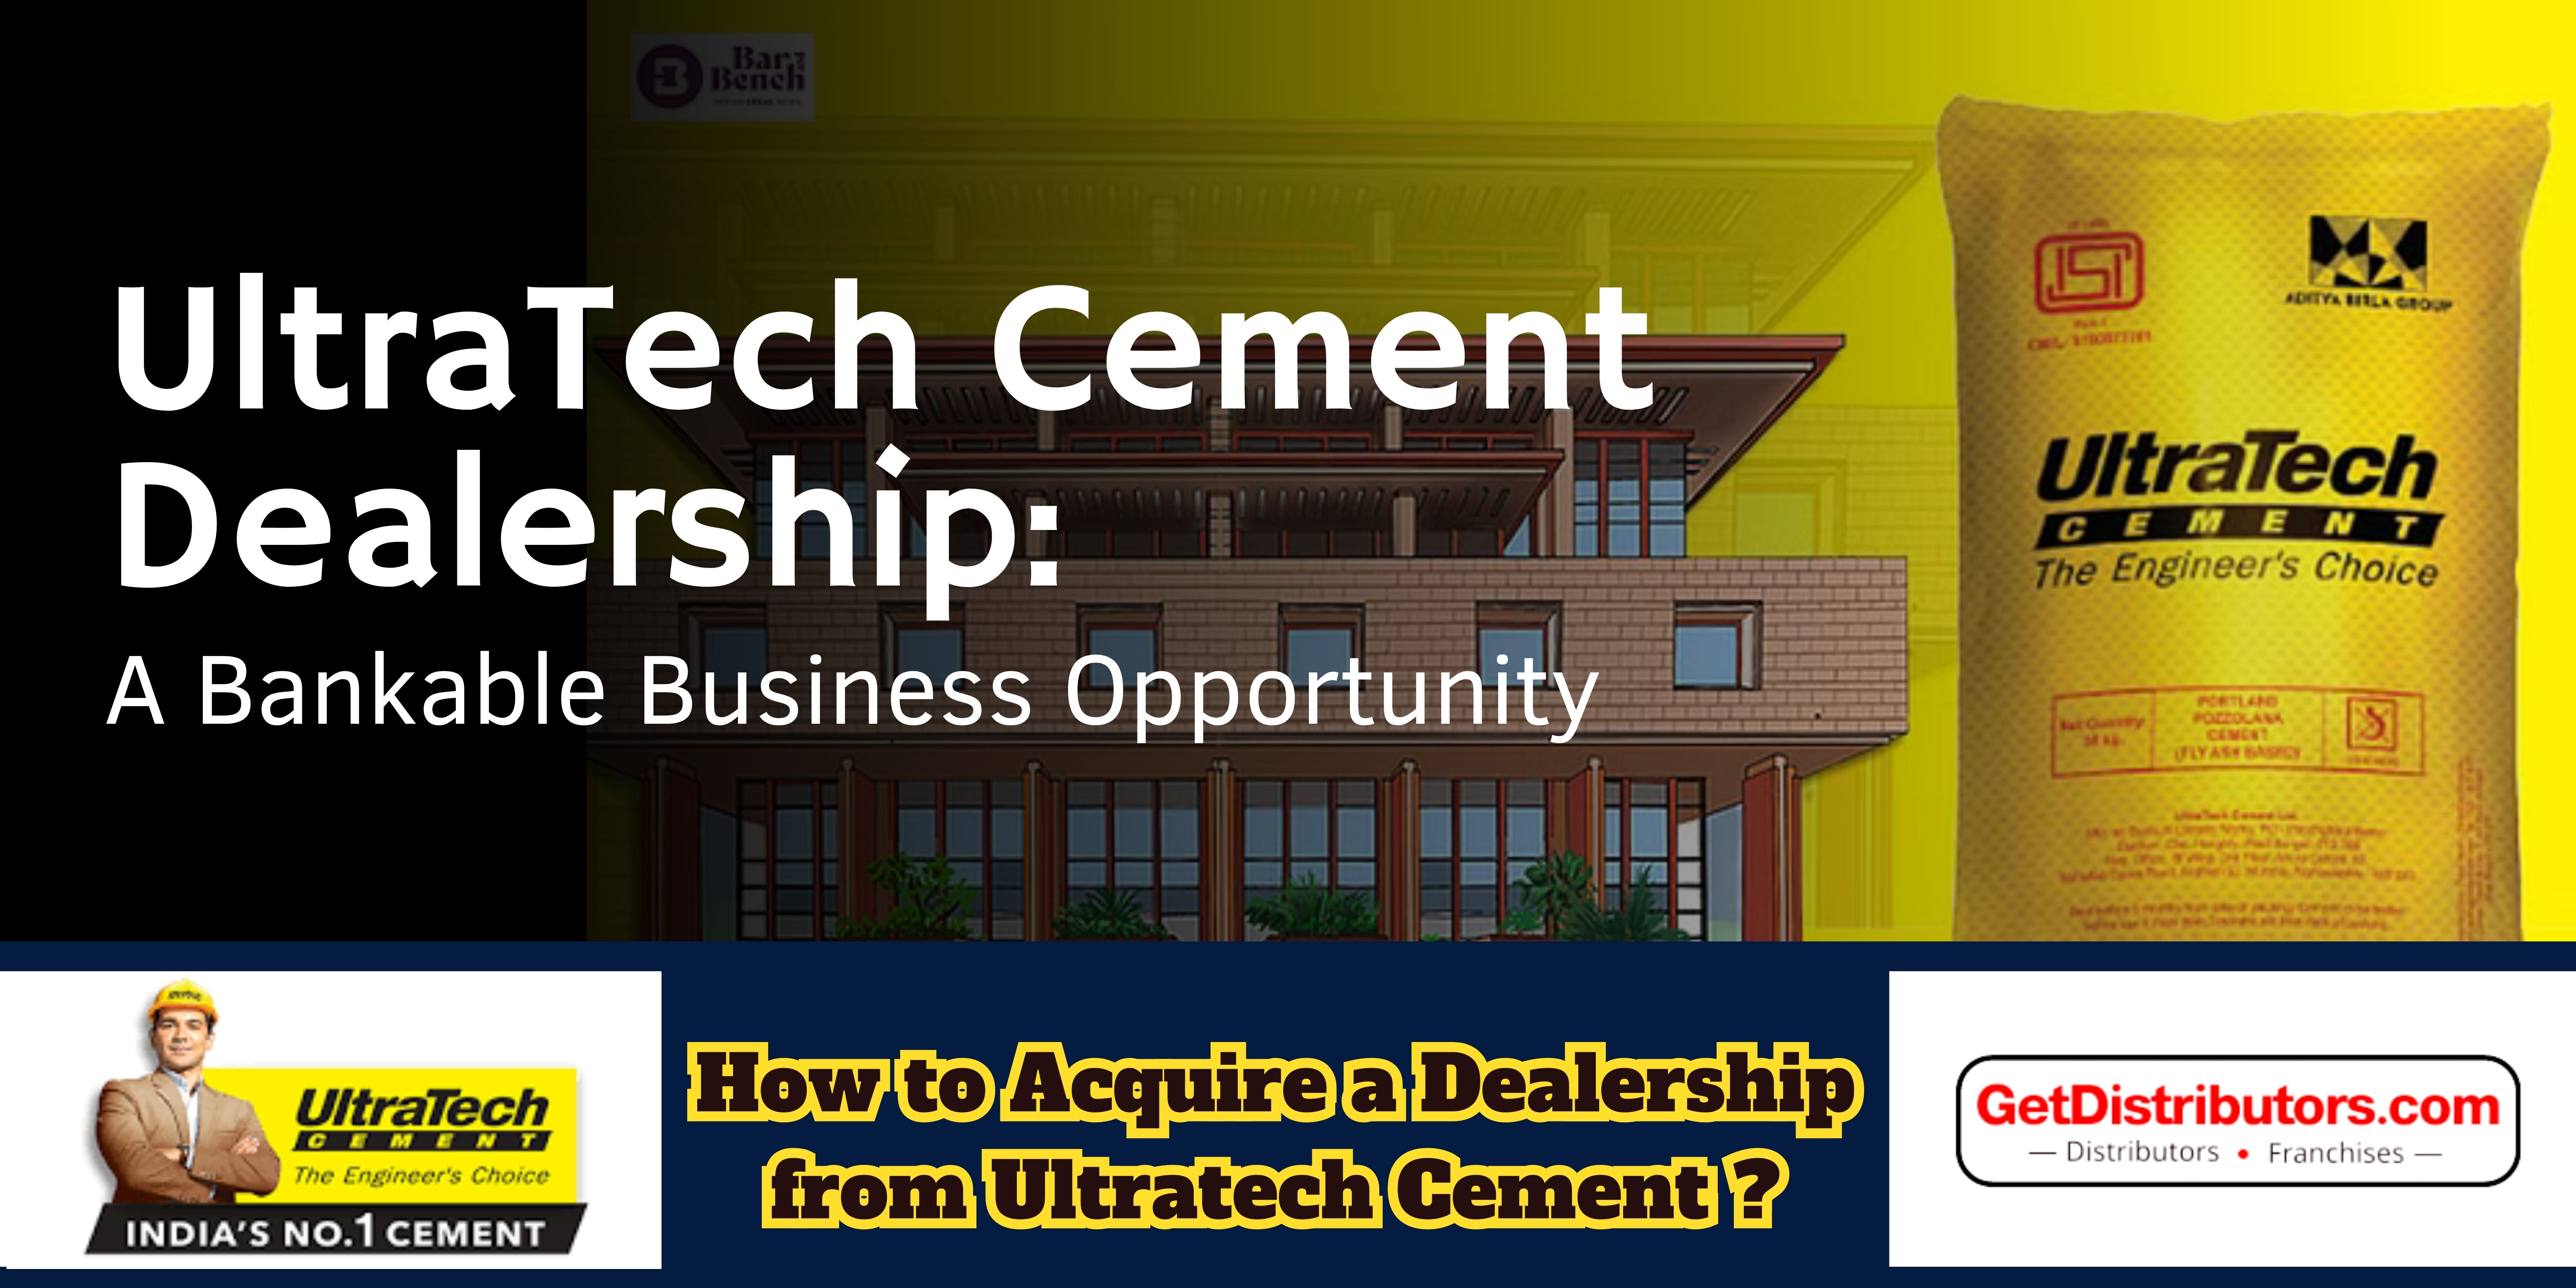 UltraTech Cement Dealership: A Bankable Business Opportunity